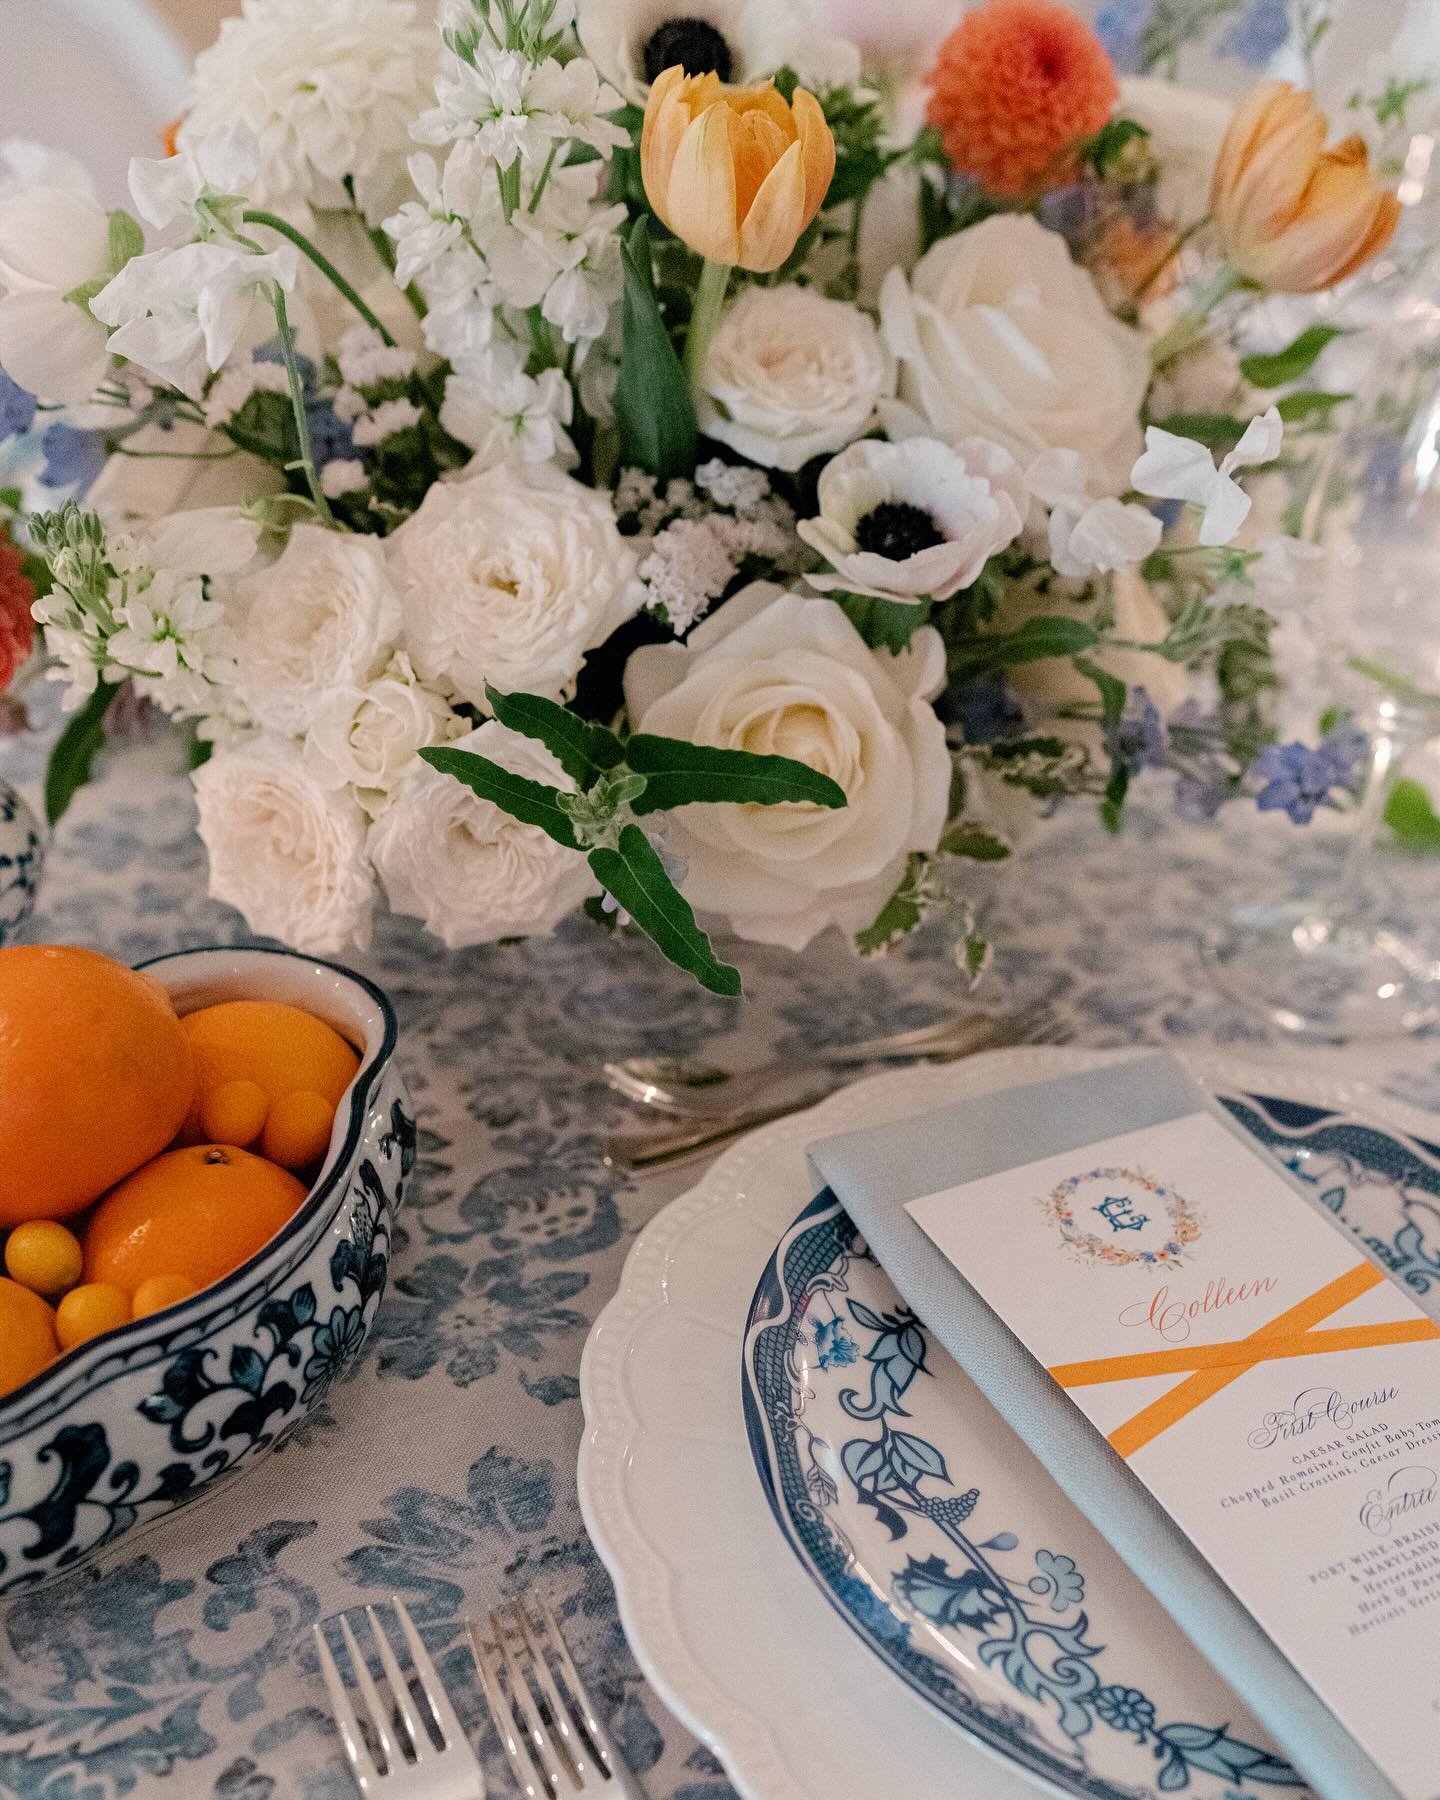 Lots of mentions back to C&amp;T&rsquo;s wedding for inspiration the past few weeks! Forever crushing on this preppy meets modern romantic design. If you&rsquo;re considering an unexpected pop of color, here is your sign to go for it 🍊 

Photographe